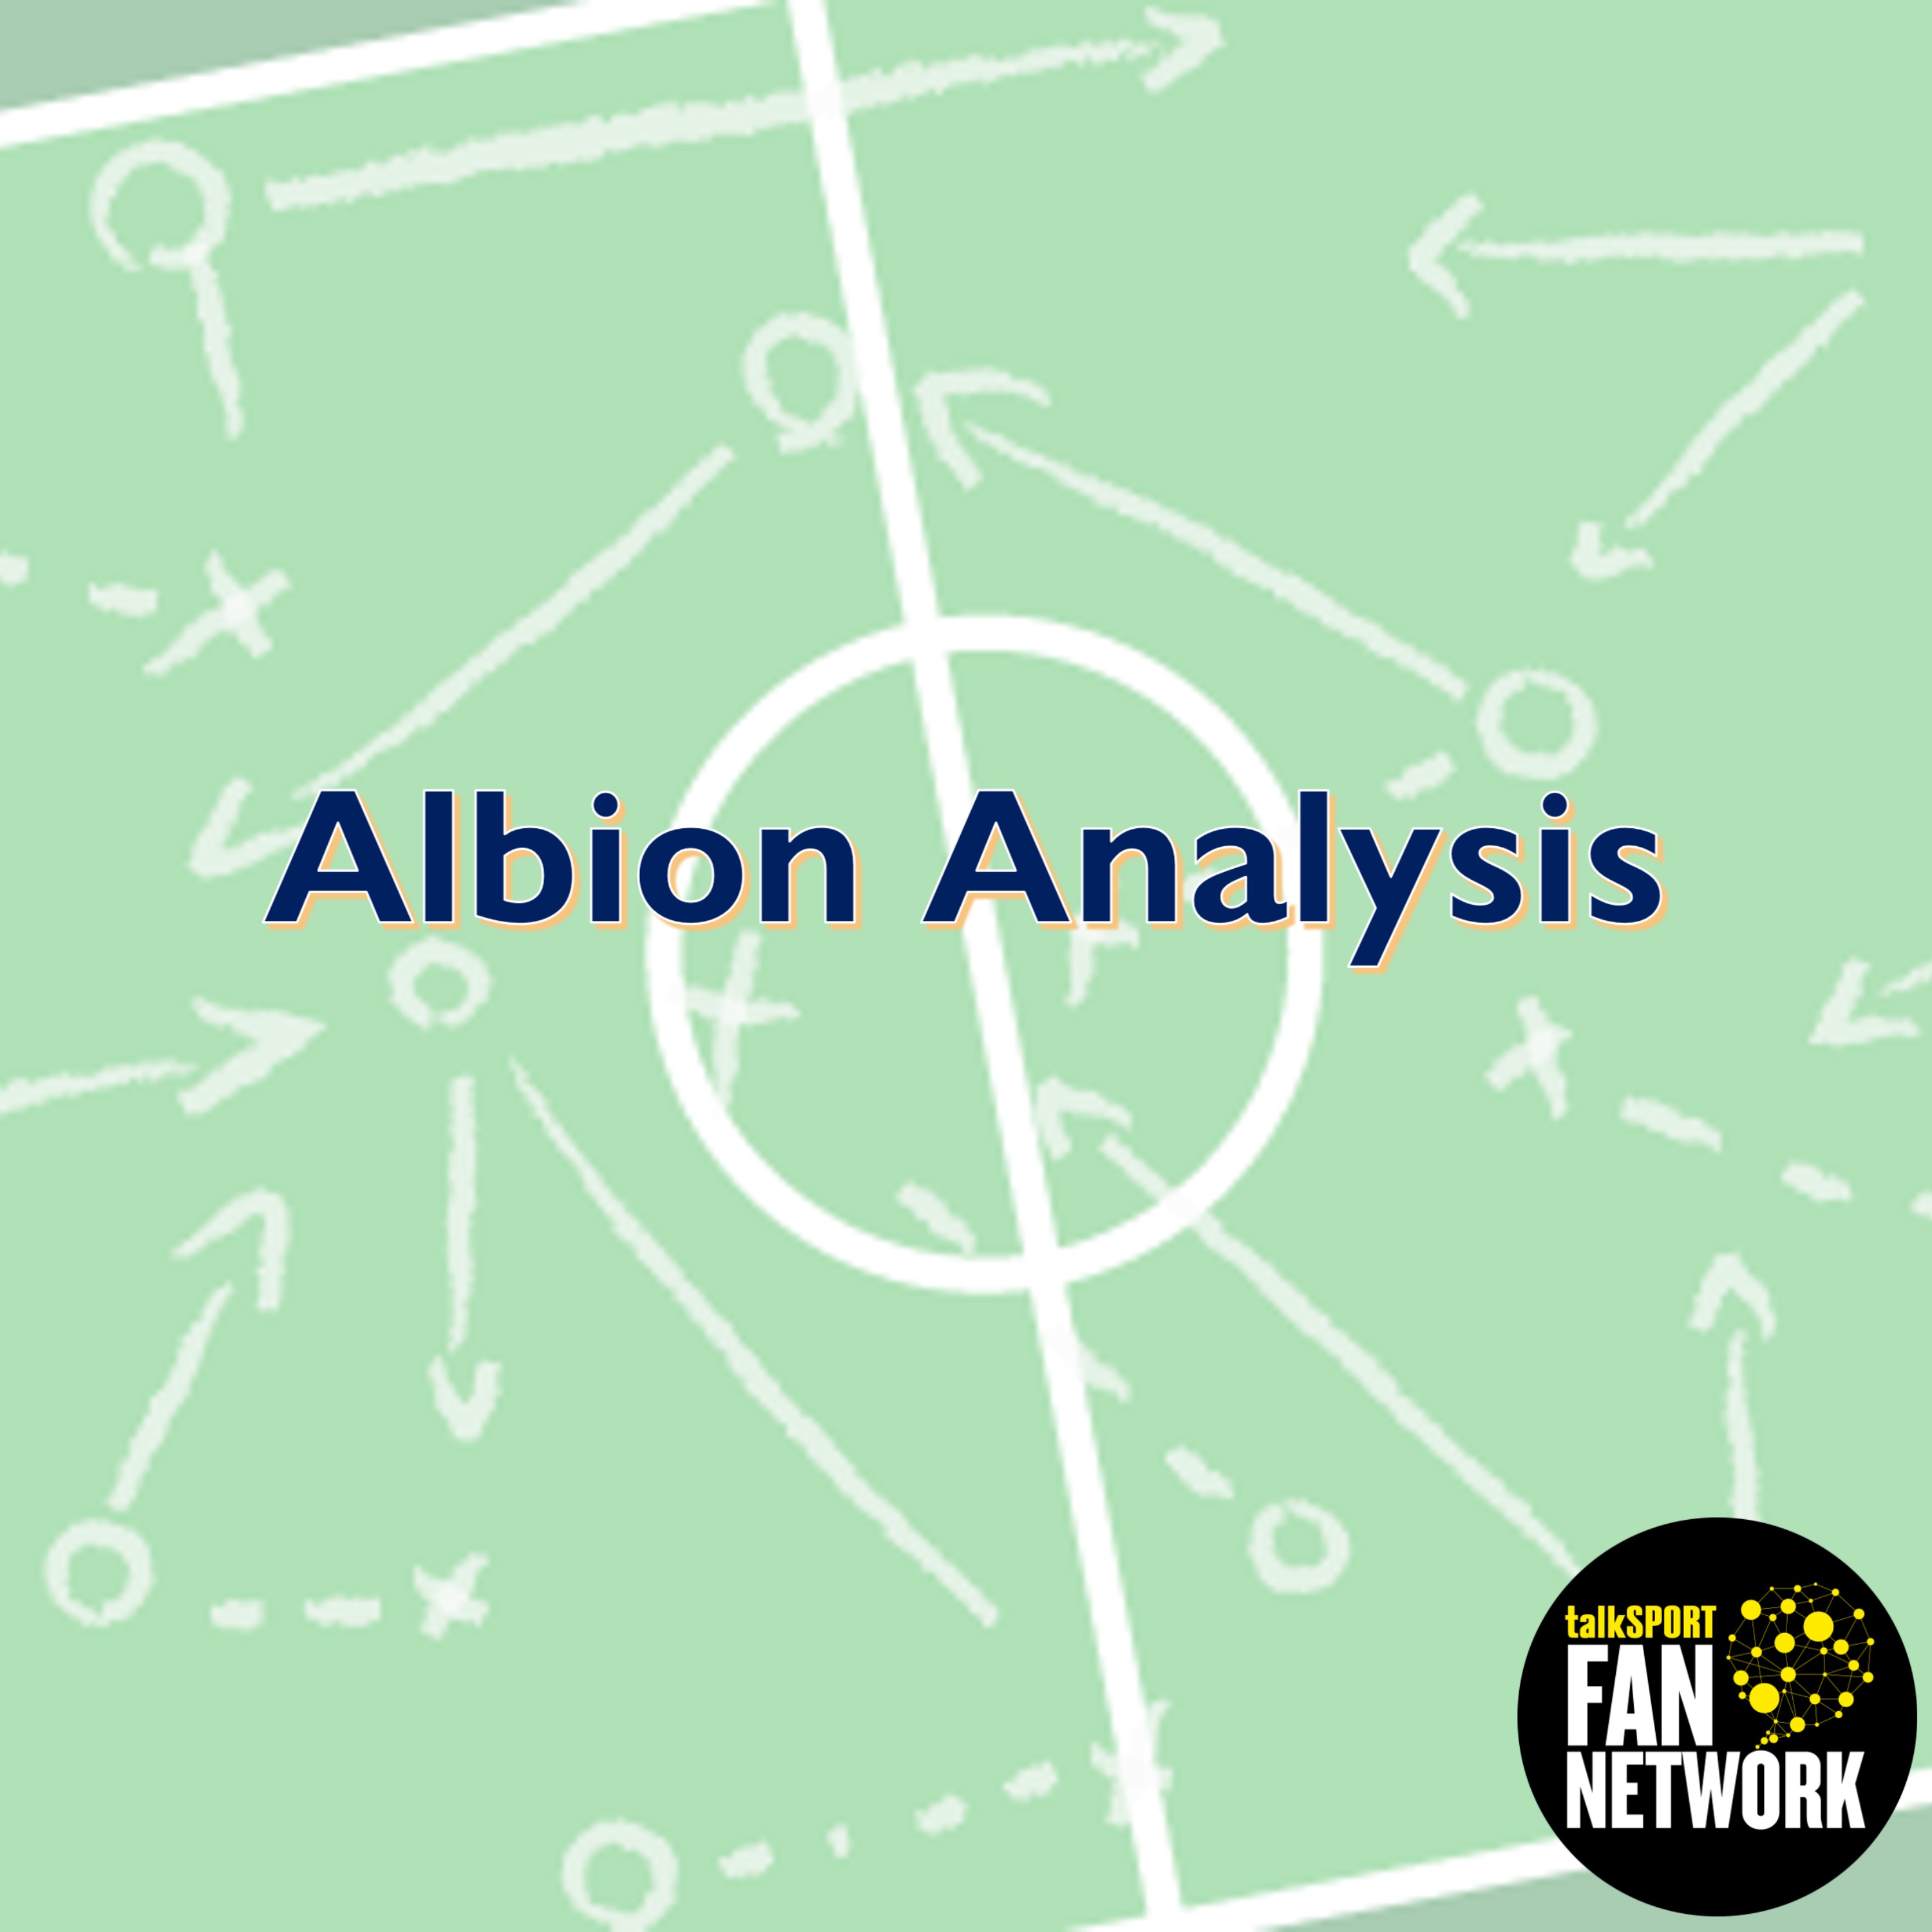 Albion Analysis on Sundaerland (h): Missed chances result in a missed opportunity